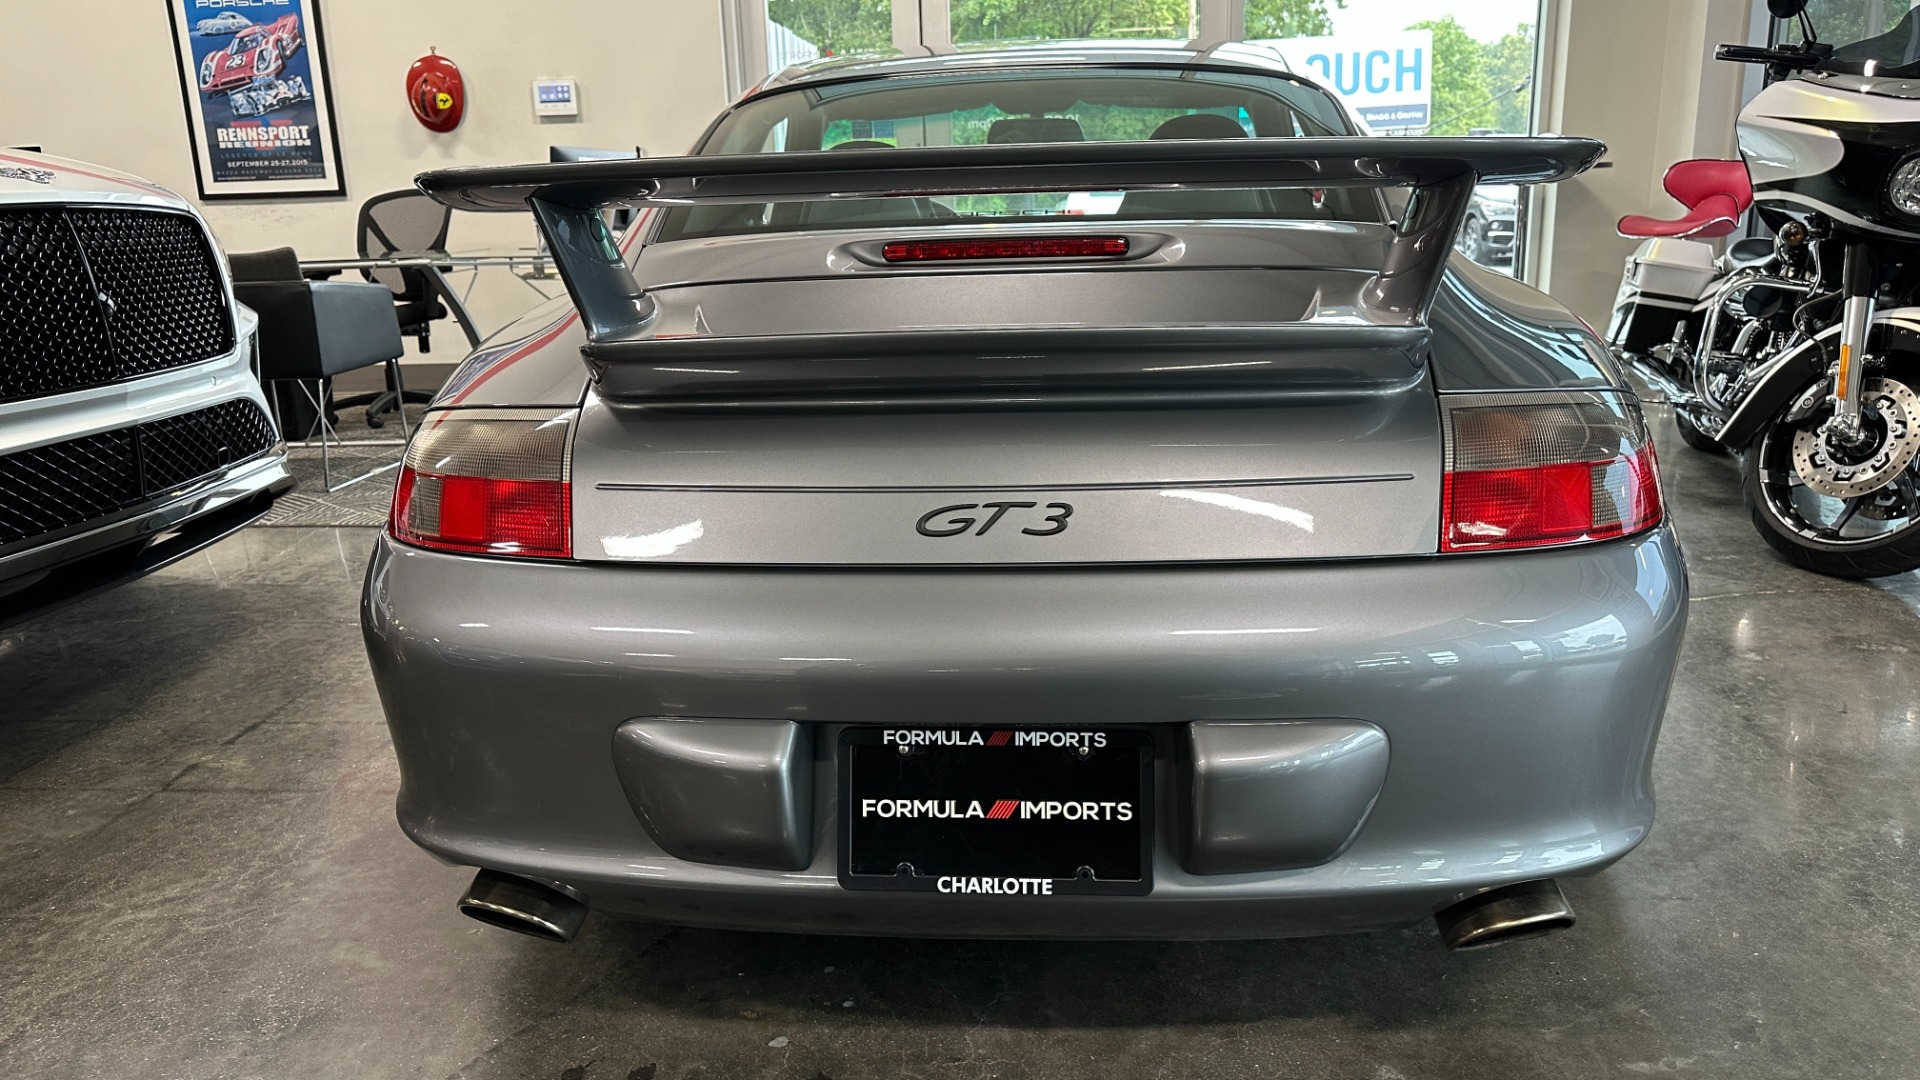 Used 2004 Porsche 911 GT3 / SPORTS SEATS / SERVICE BINDER / CLEAN DME for sale $121,900 at Formula Imports in Charlotte NC 28227 25